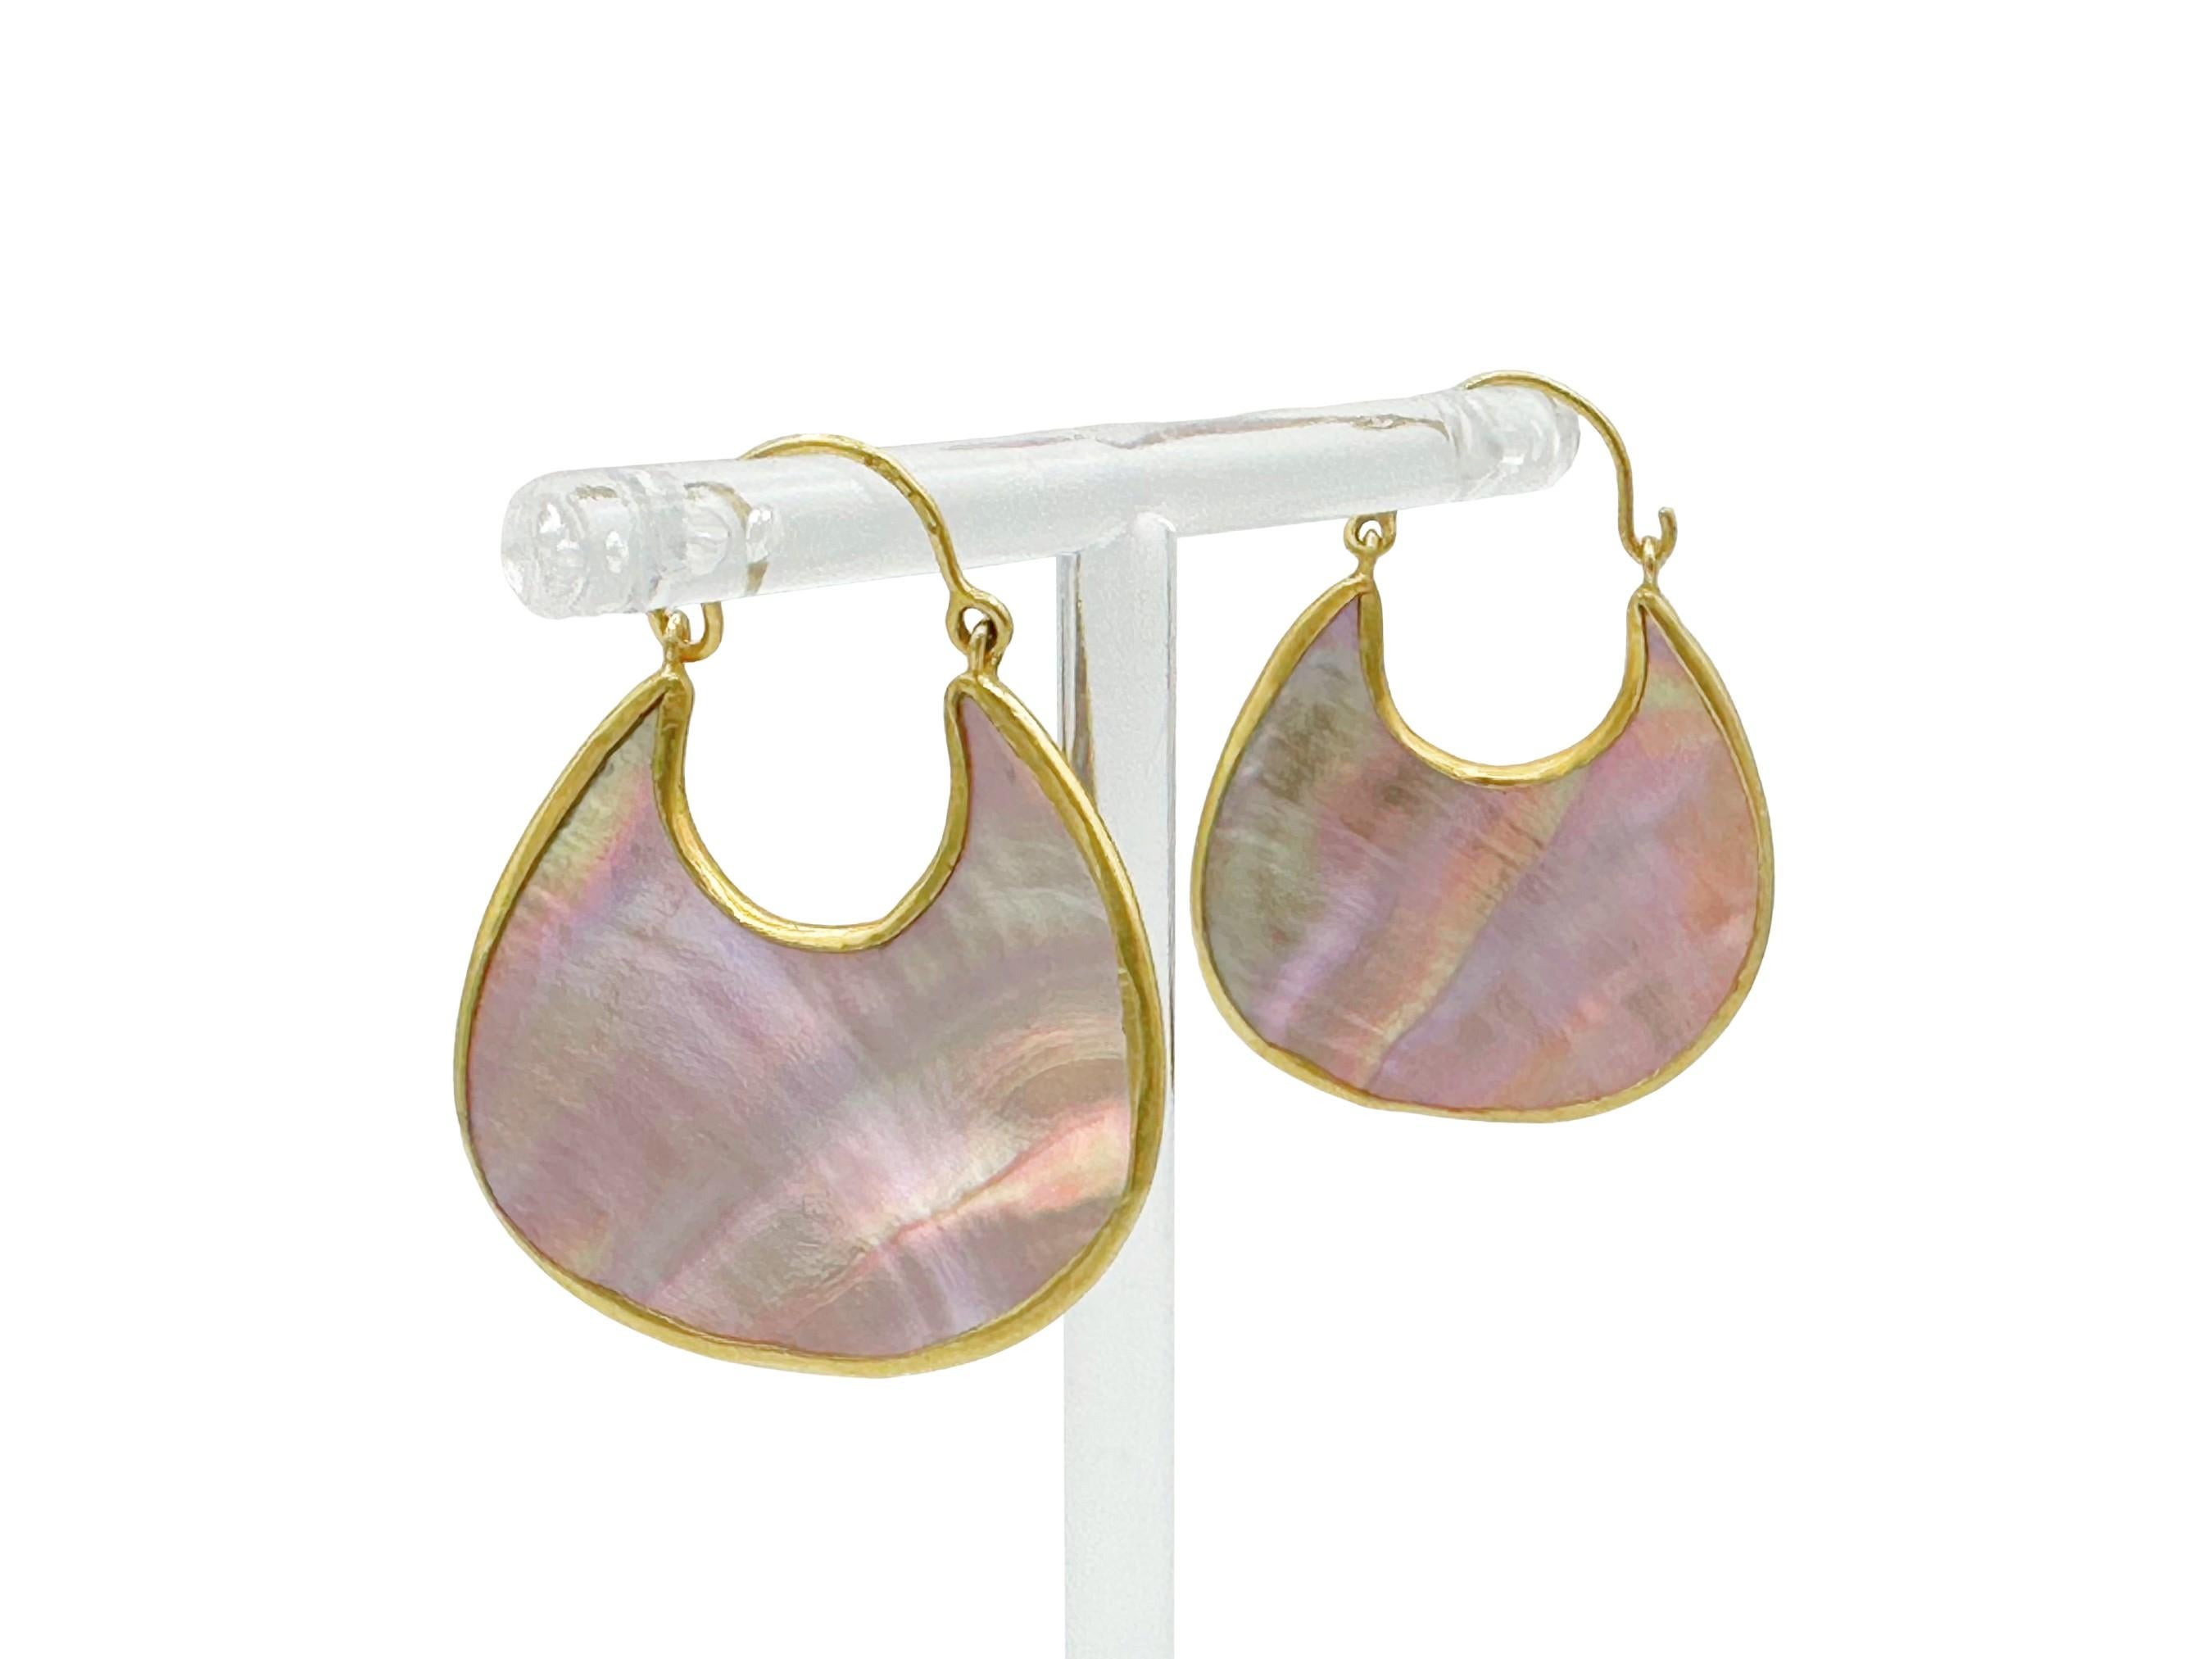 Wear a piece of luxe with these stunning handmade Pippa Small 18K yellow gold earrings, crafted in 18K yellow gold and natural mother-of-pearl. The iridescent mother-of-pearl is lustrous and flashes a gorgeous play of color including pinks, greens